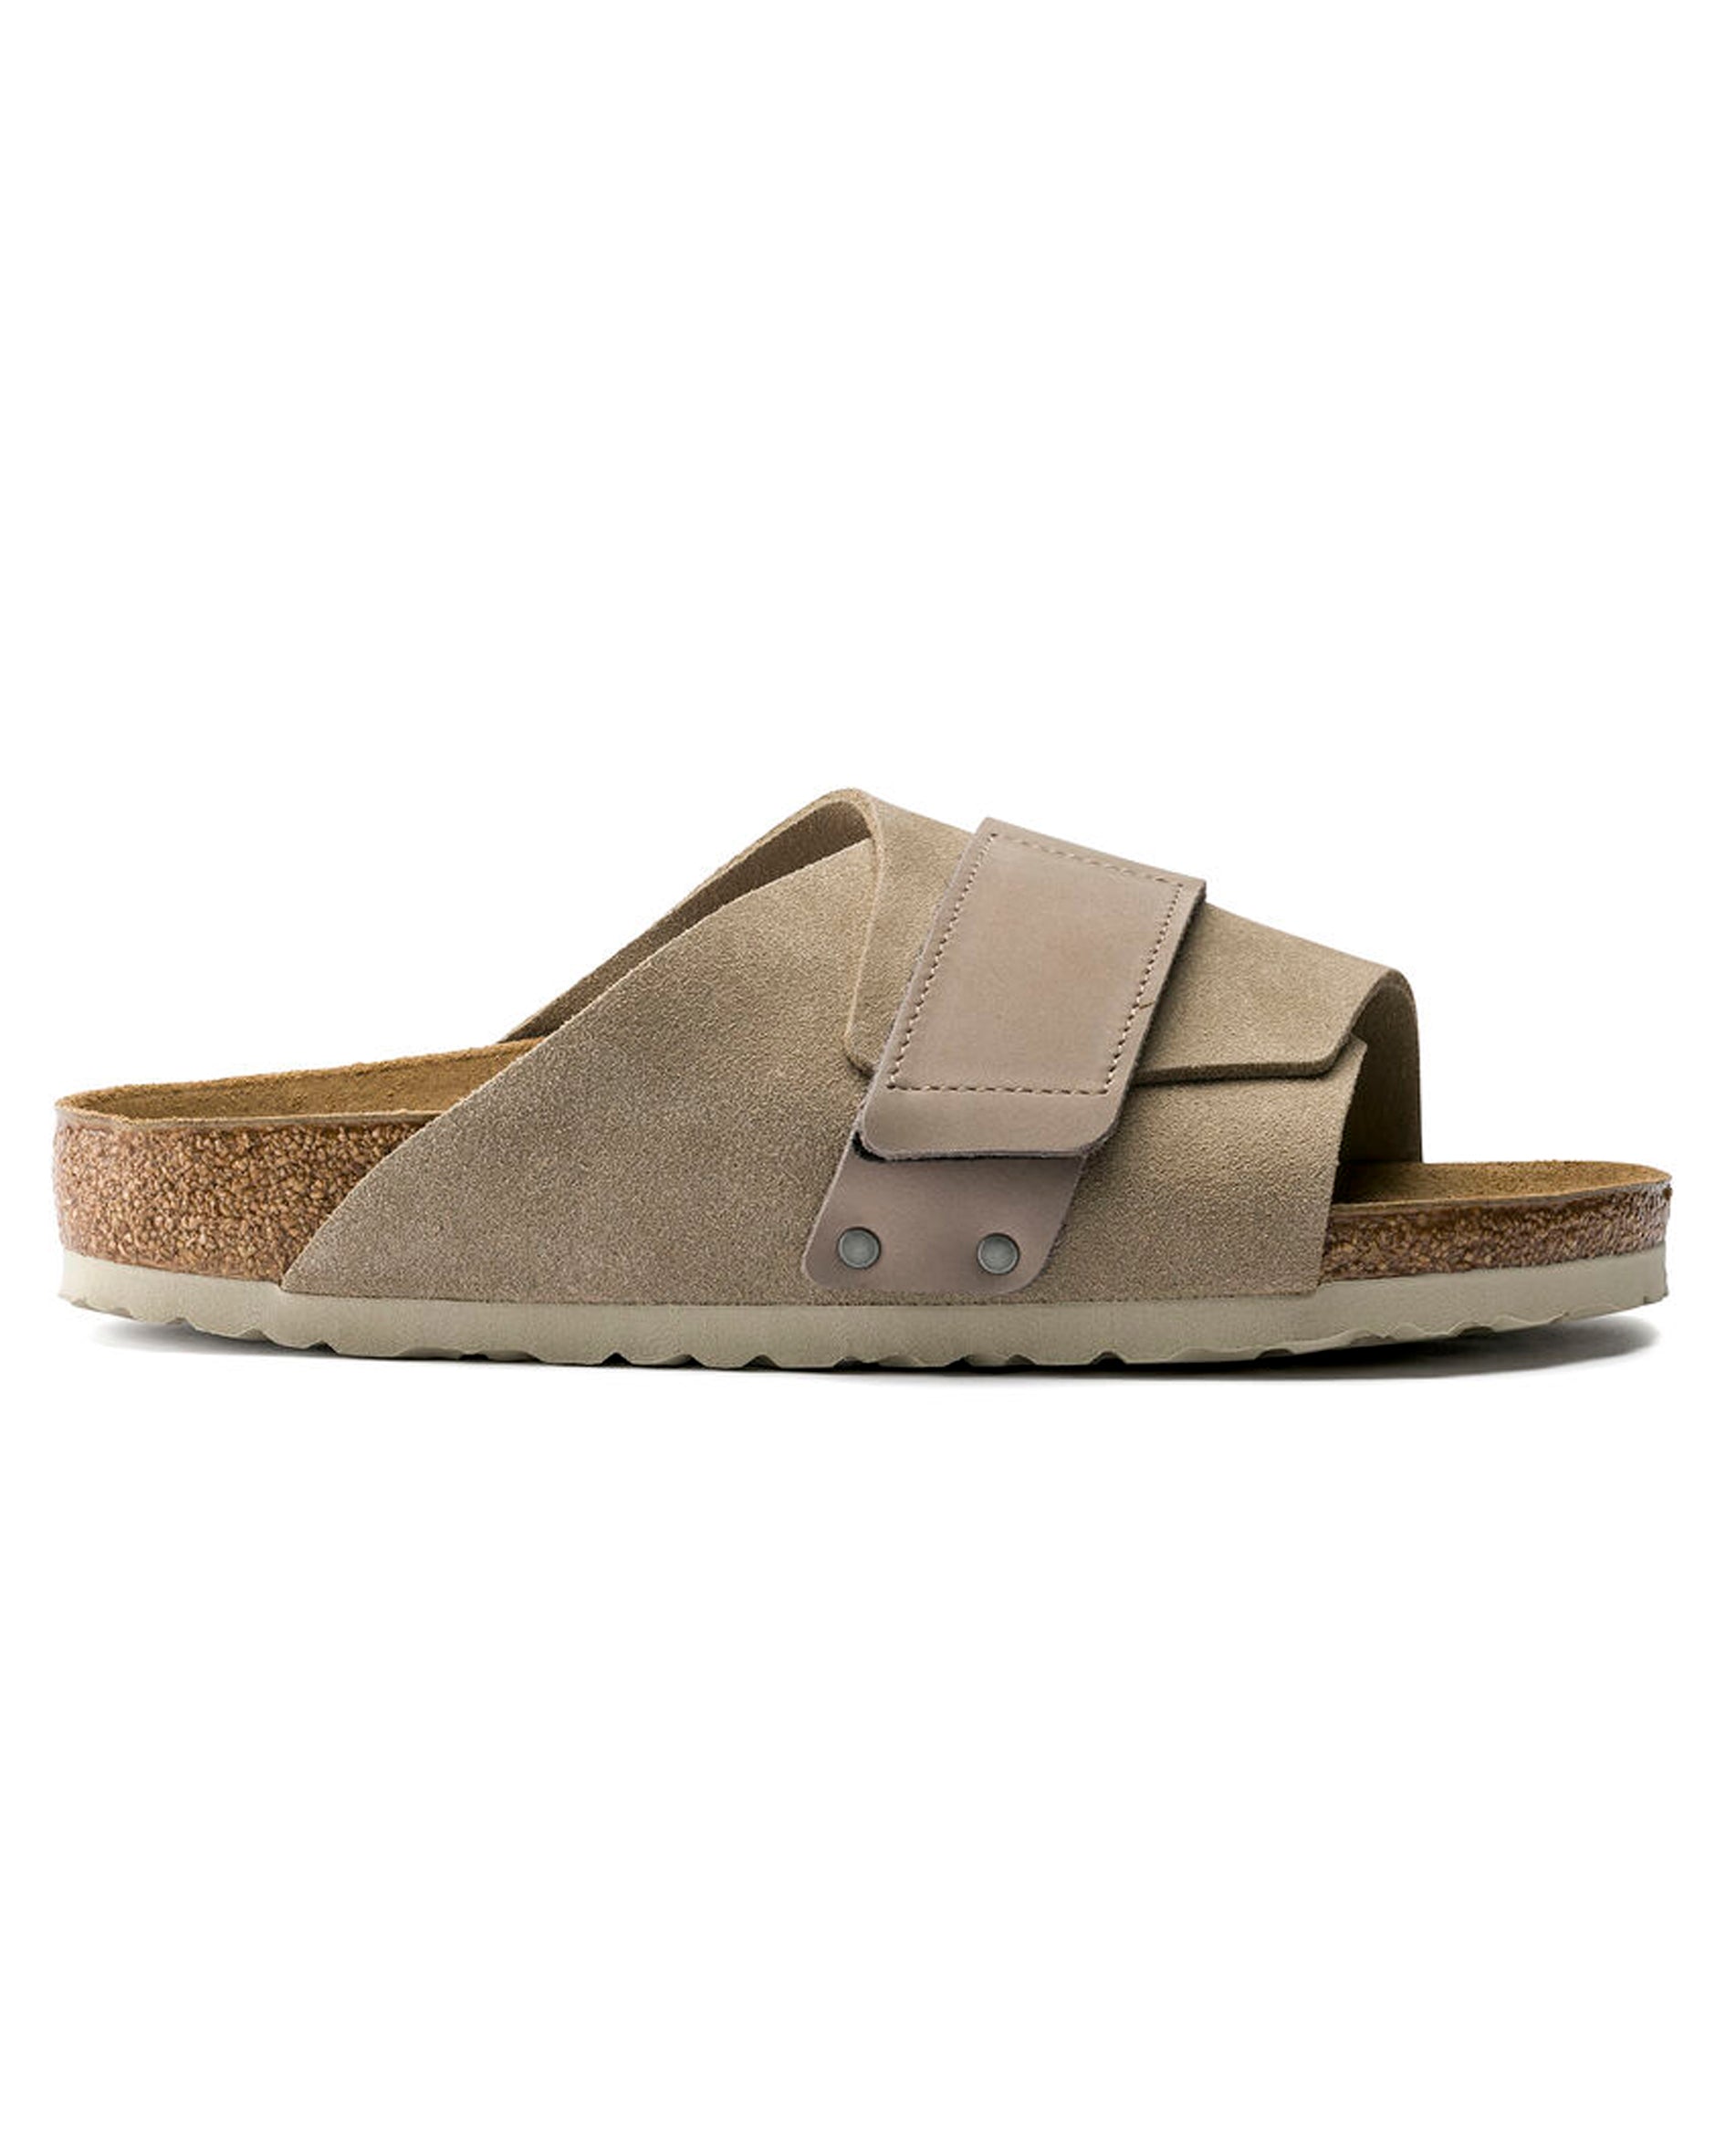 Kyoto Taupe Suede Leather Sandals